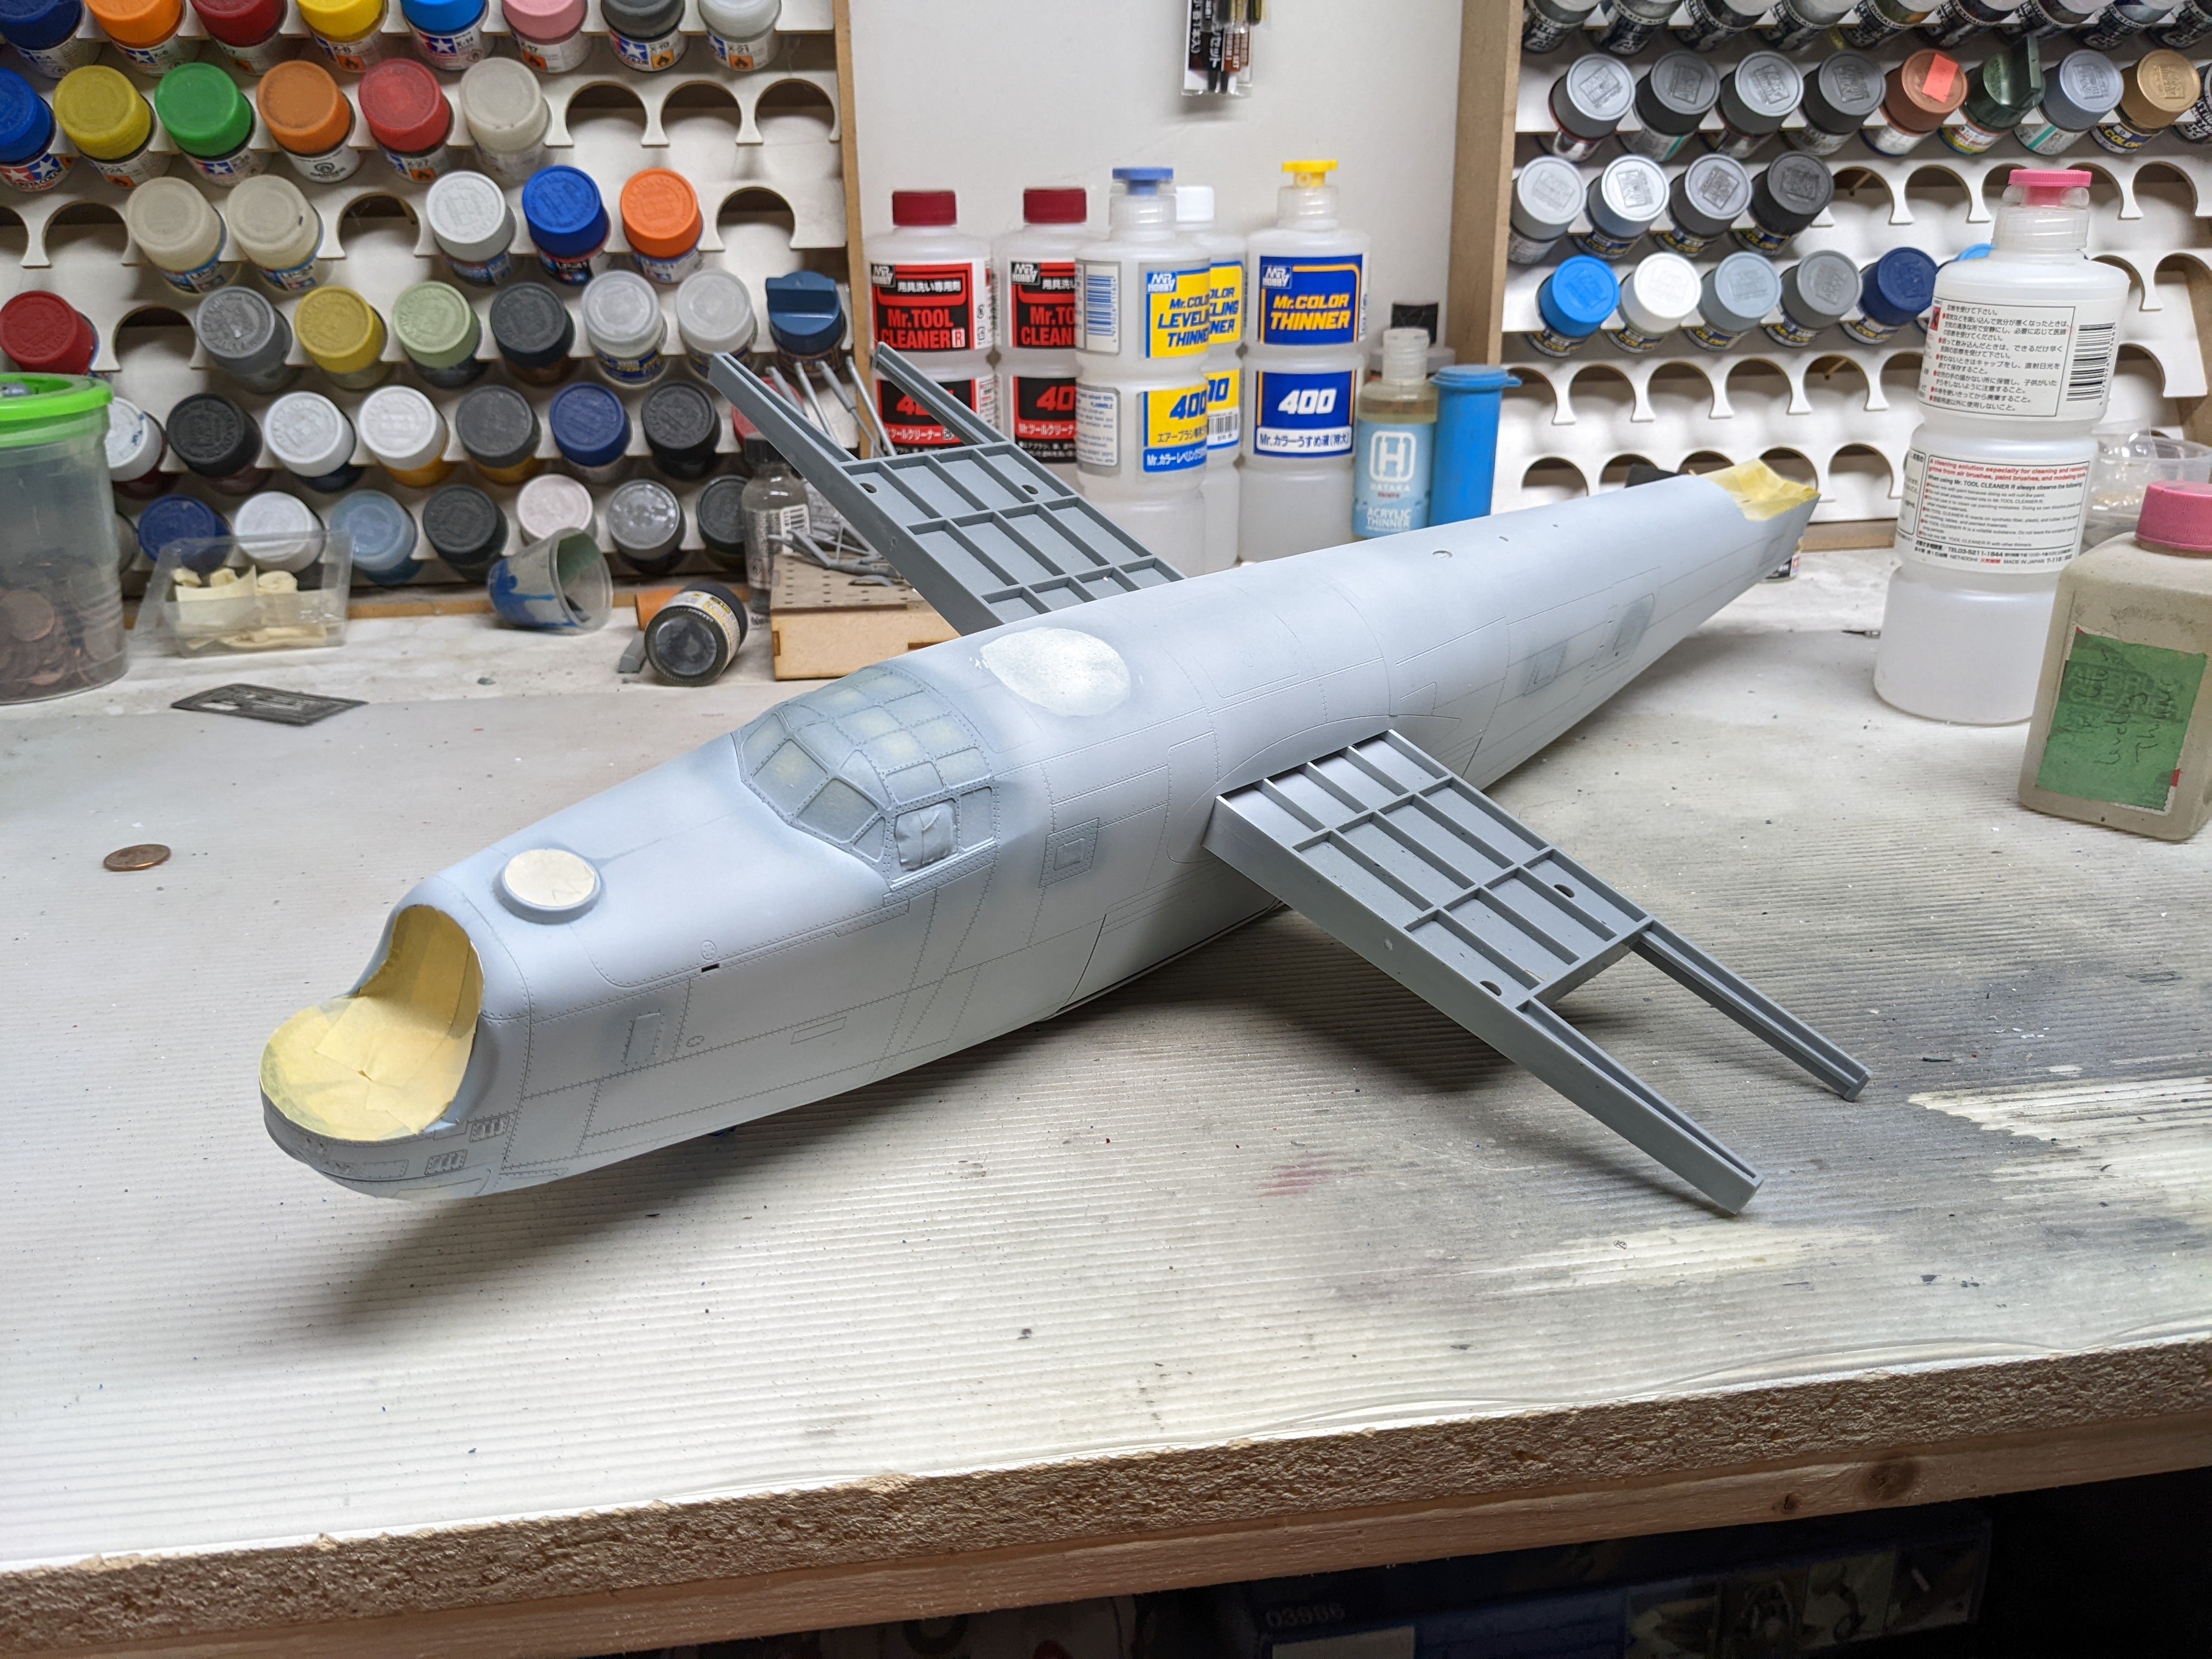 RCAF Liberator GR Mk VI - Page 5 - LSM 1/35 and Larger Work In Progress ...